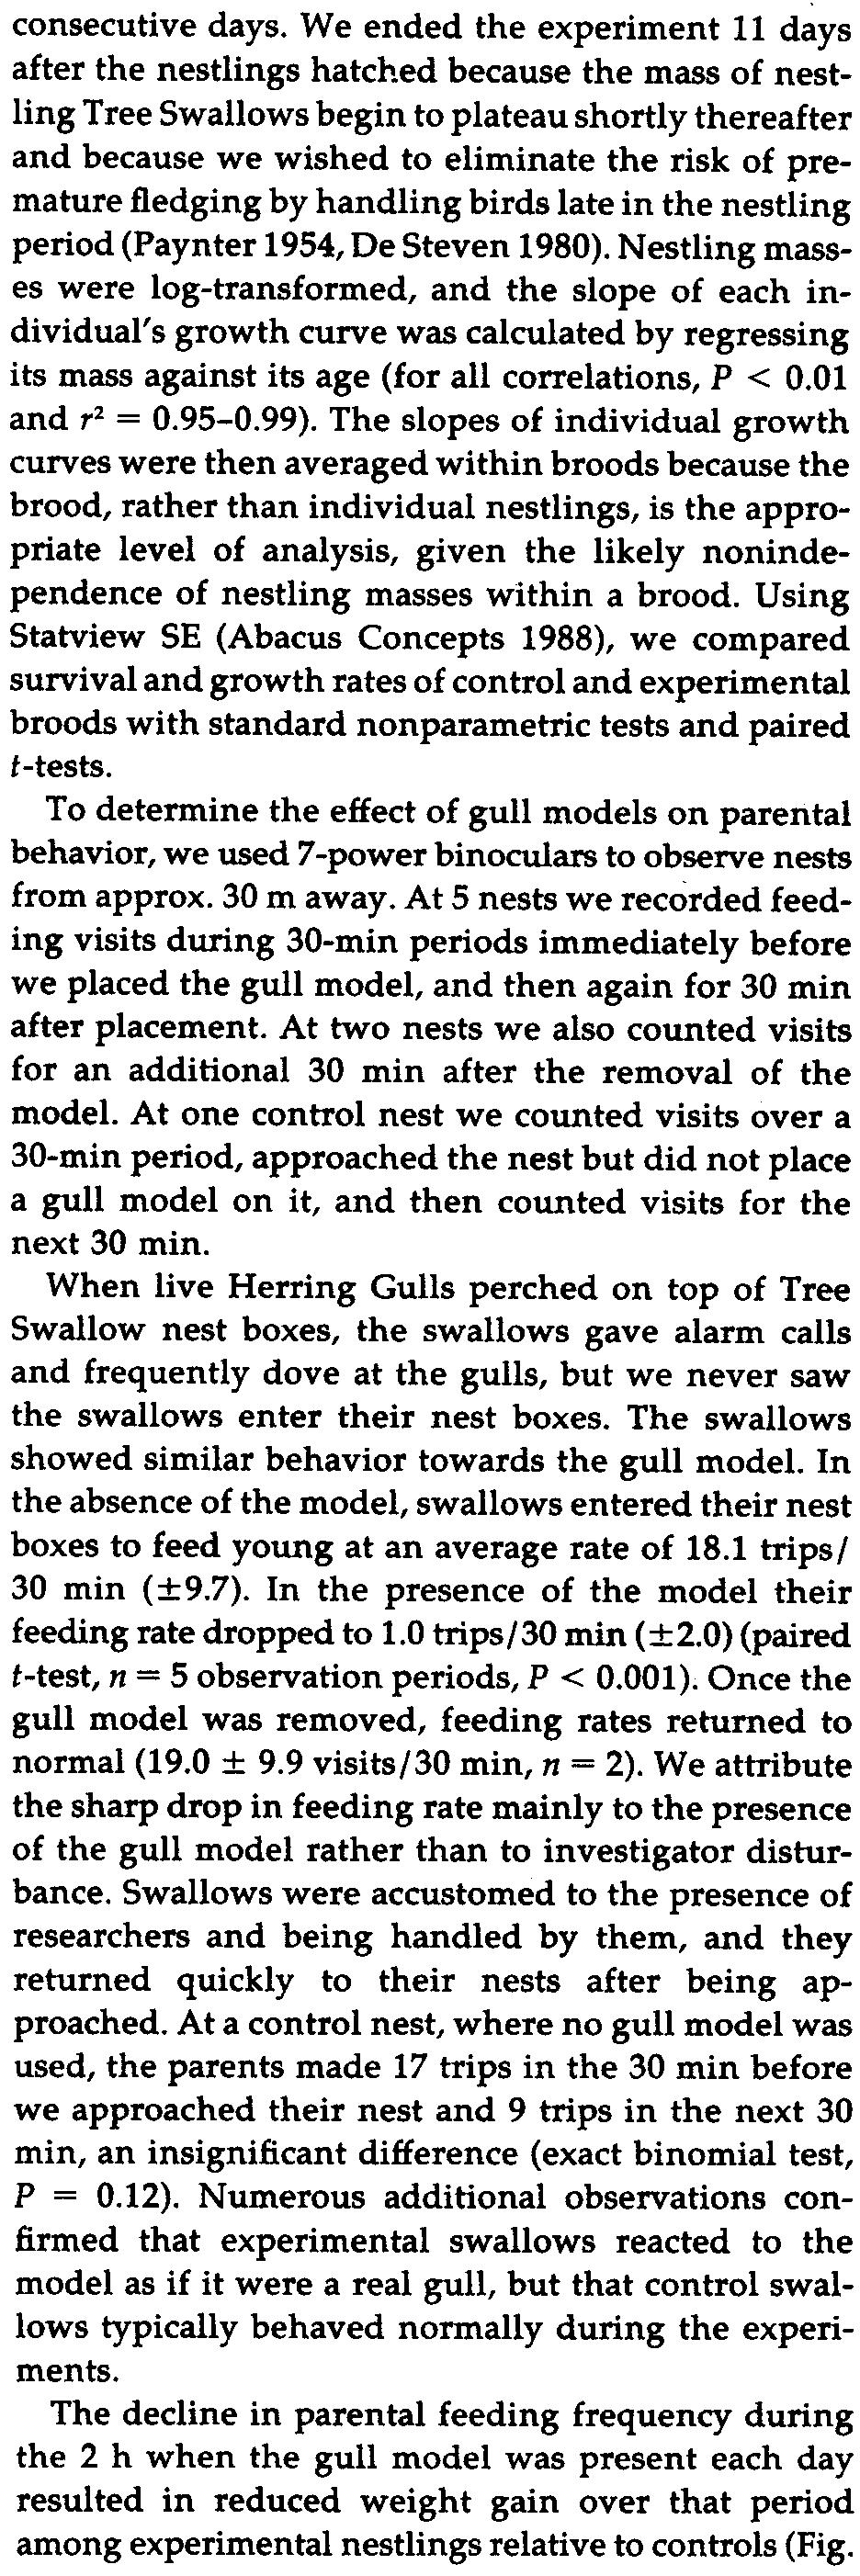 ) on a group of nest boxes according to the following procedure. We selected 12 nests with the same hatching date (14 June 1987).